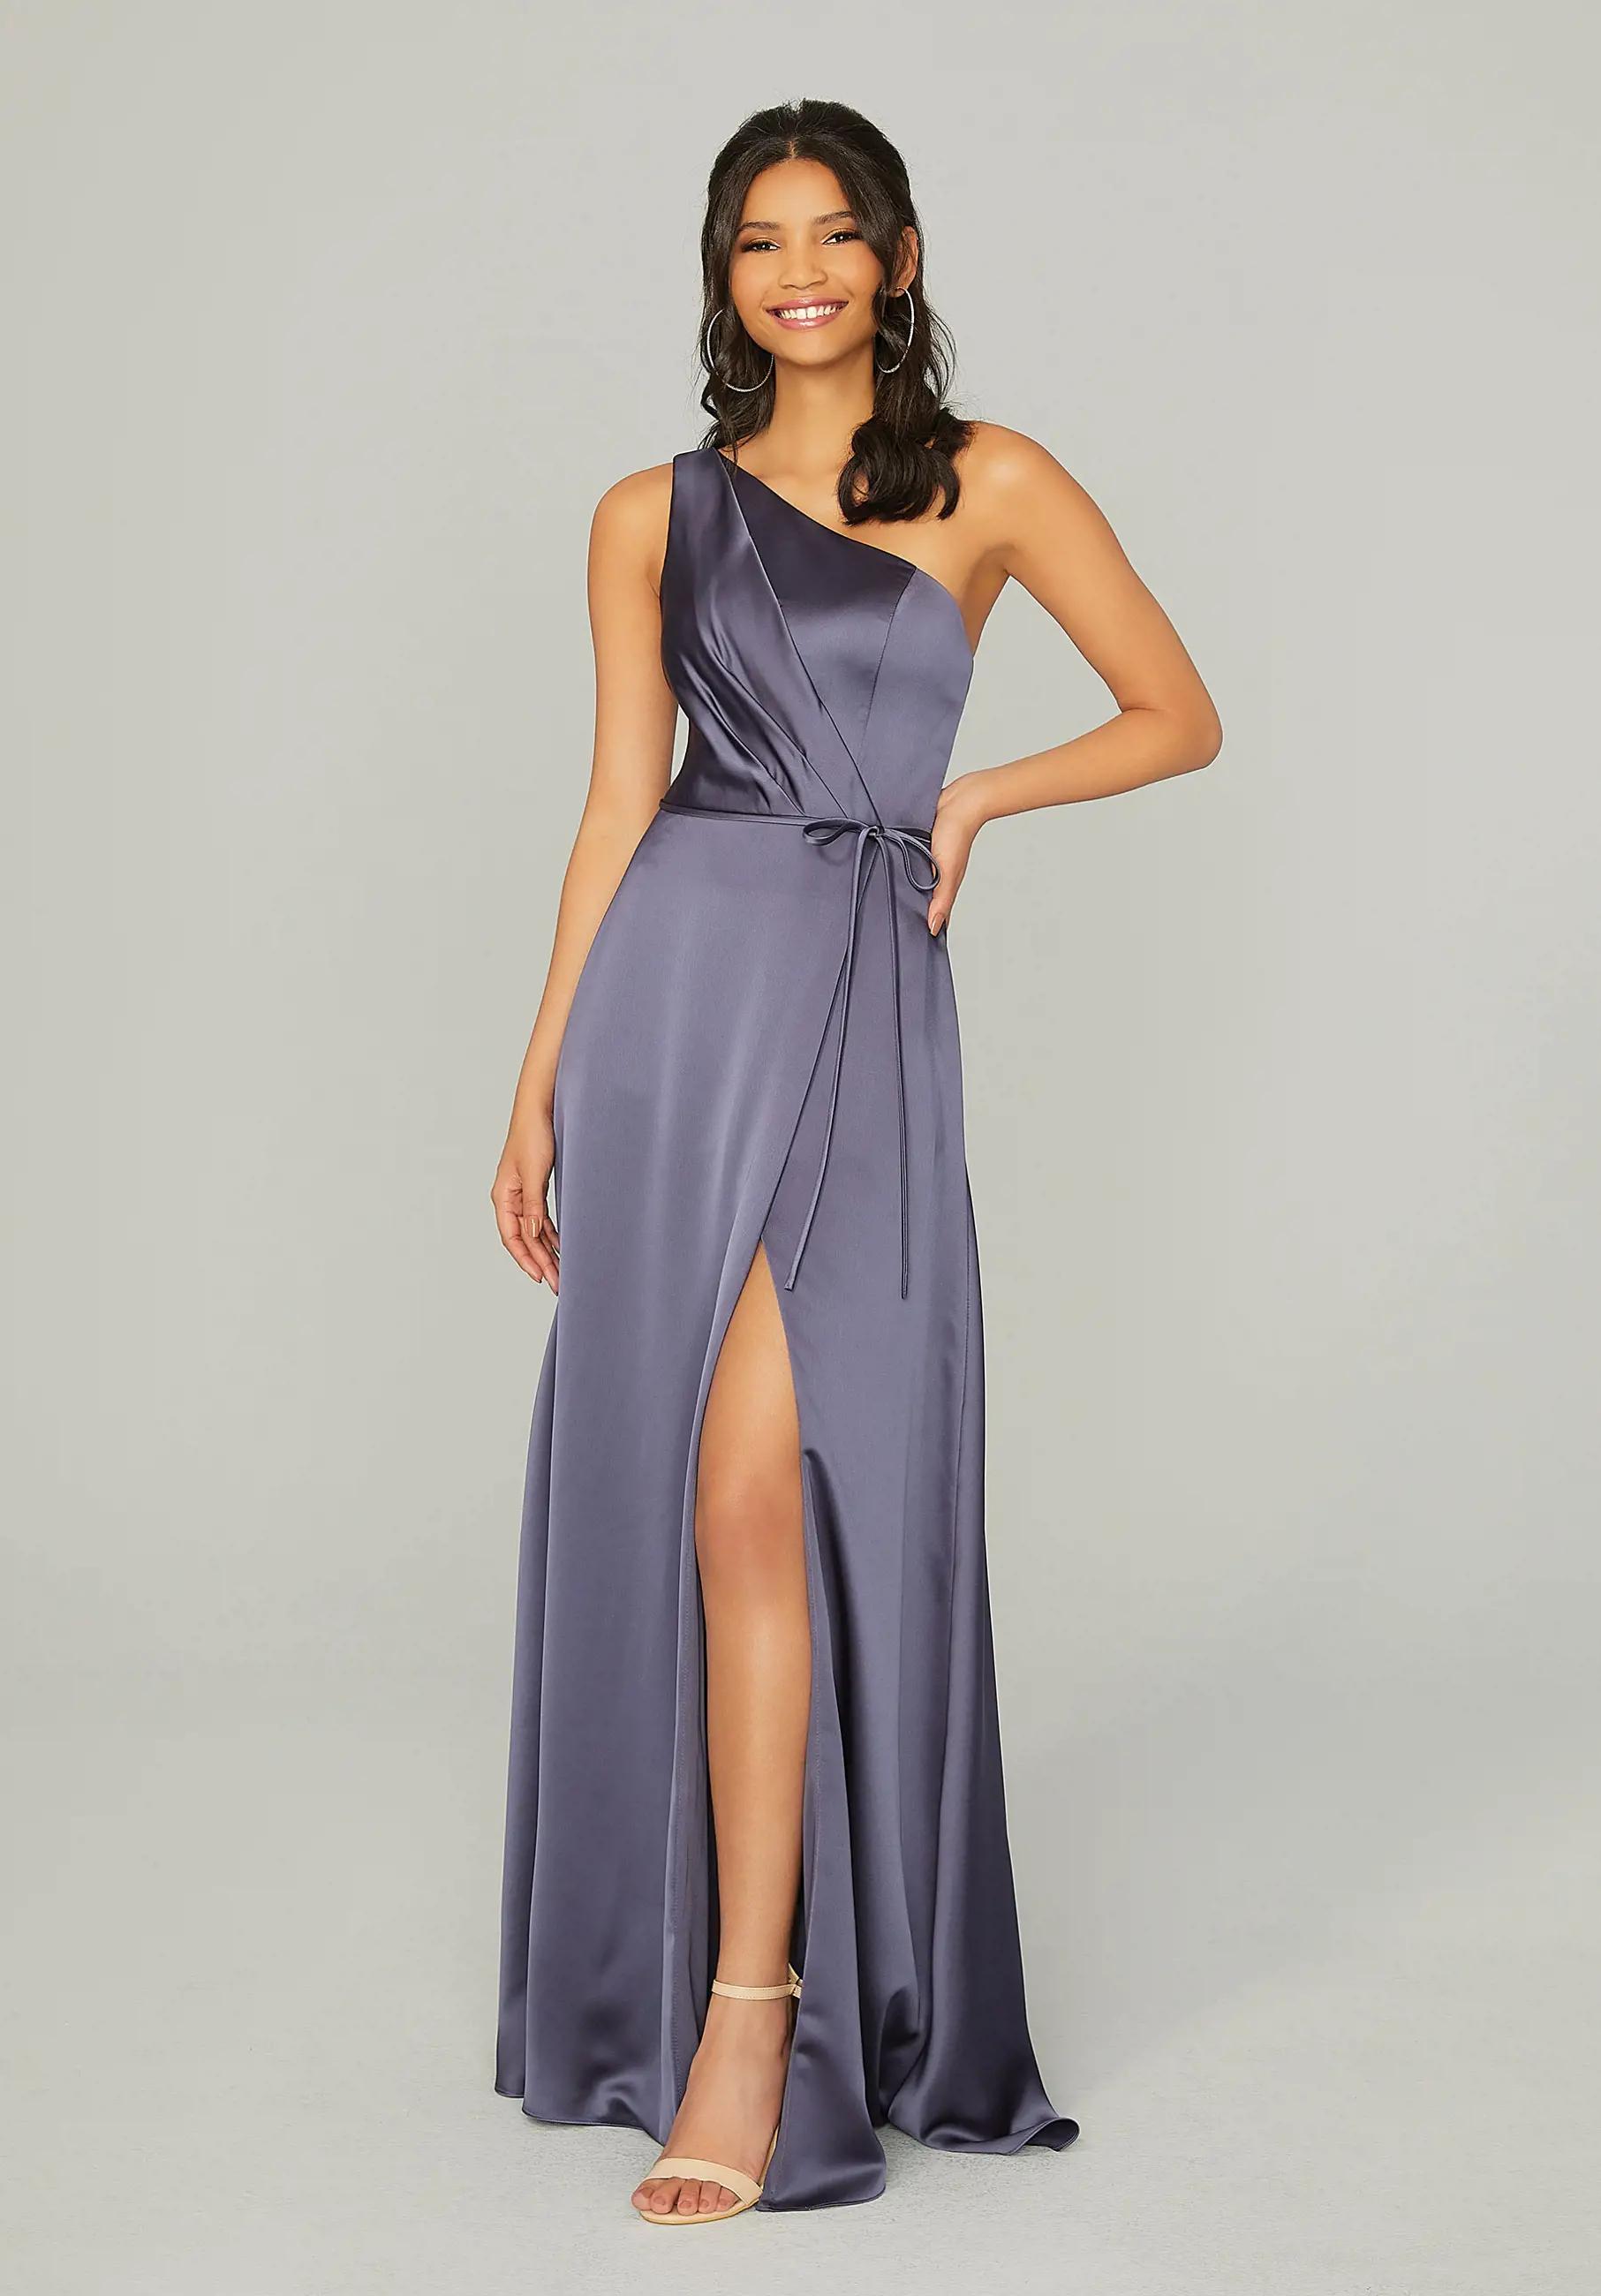 How to Pick the Right Bridesmaids Dresses. Desktop Image